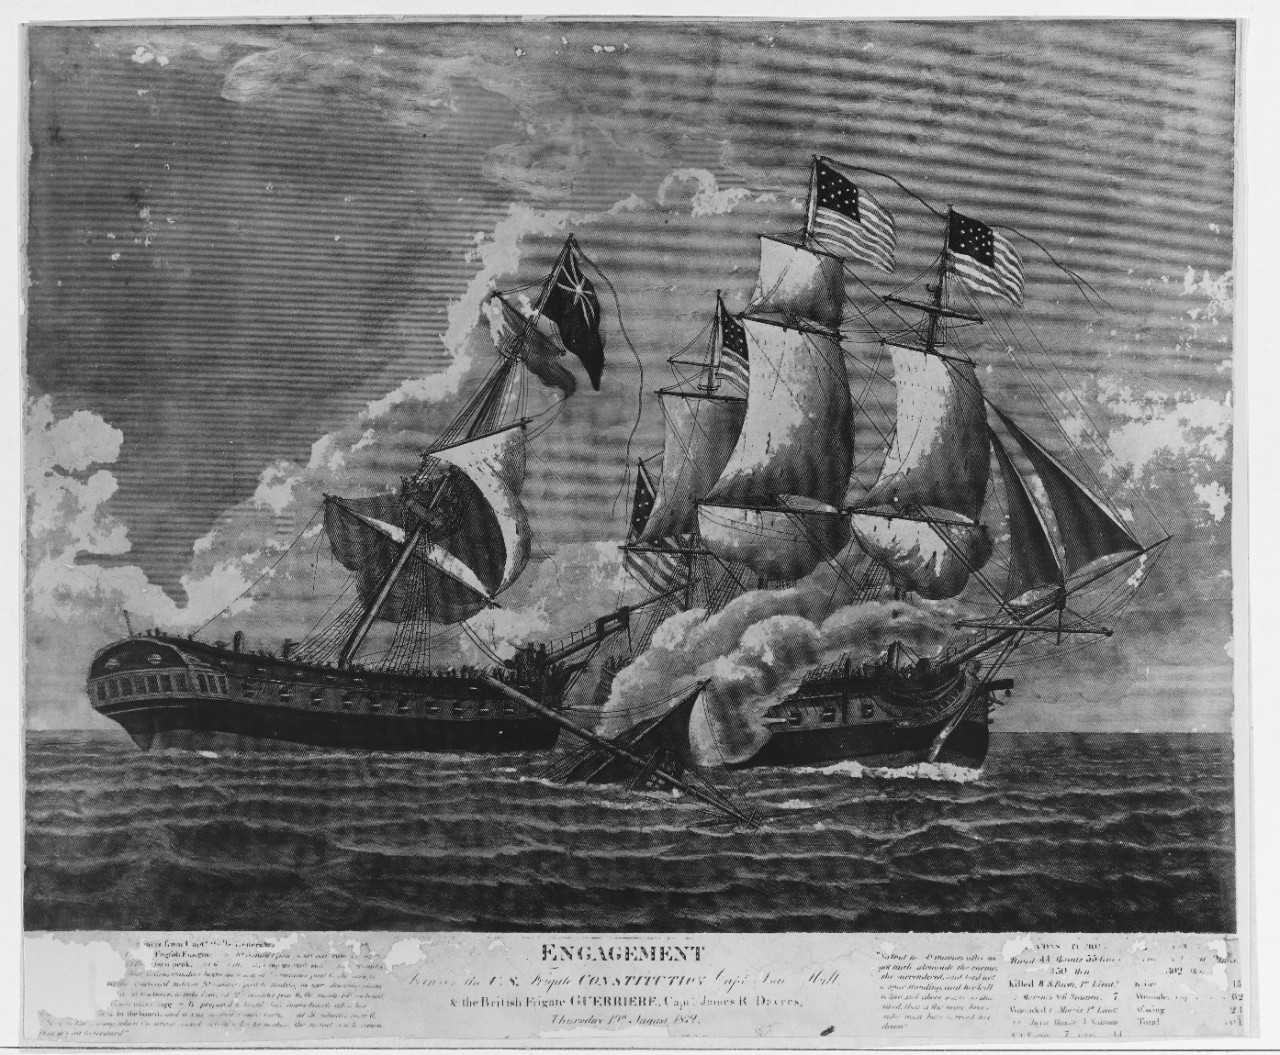 Photo #: NH 42068  Action between USS Constitution and HMS Guerriere, 19 August 1812